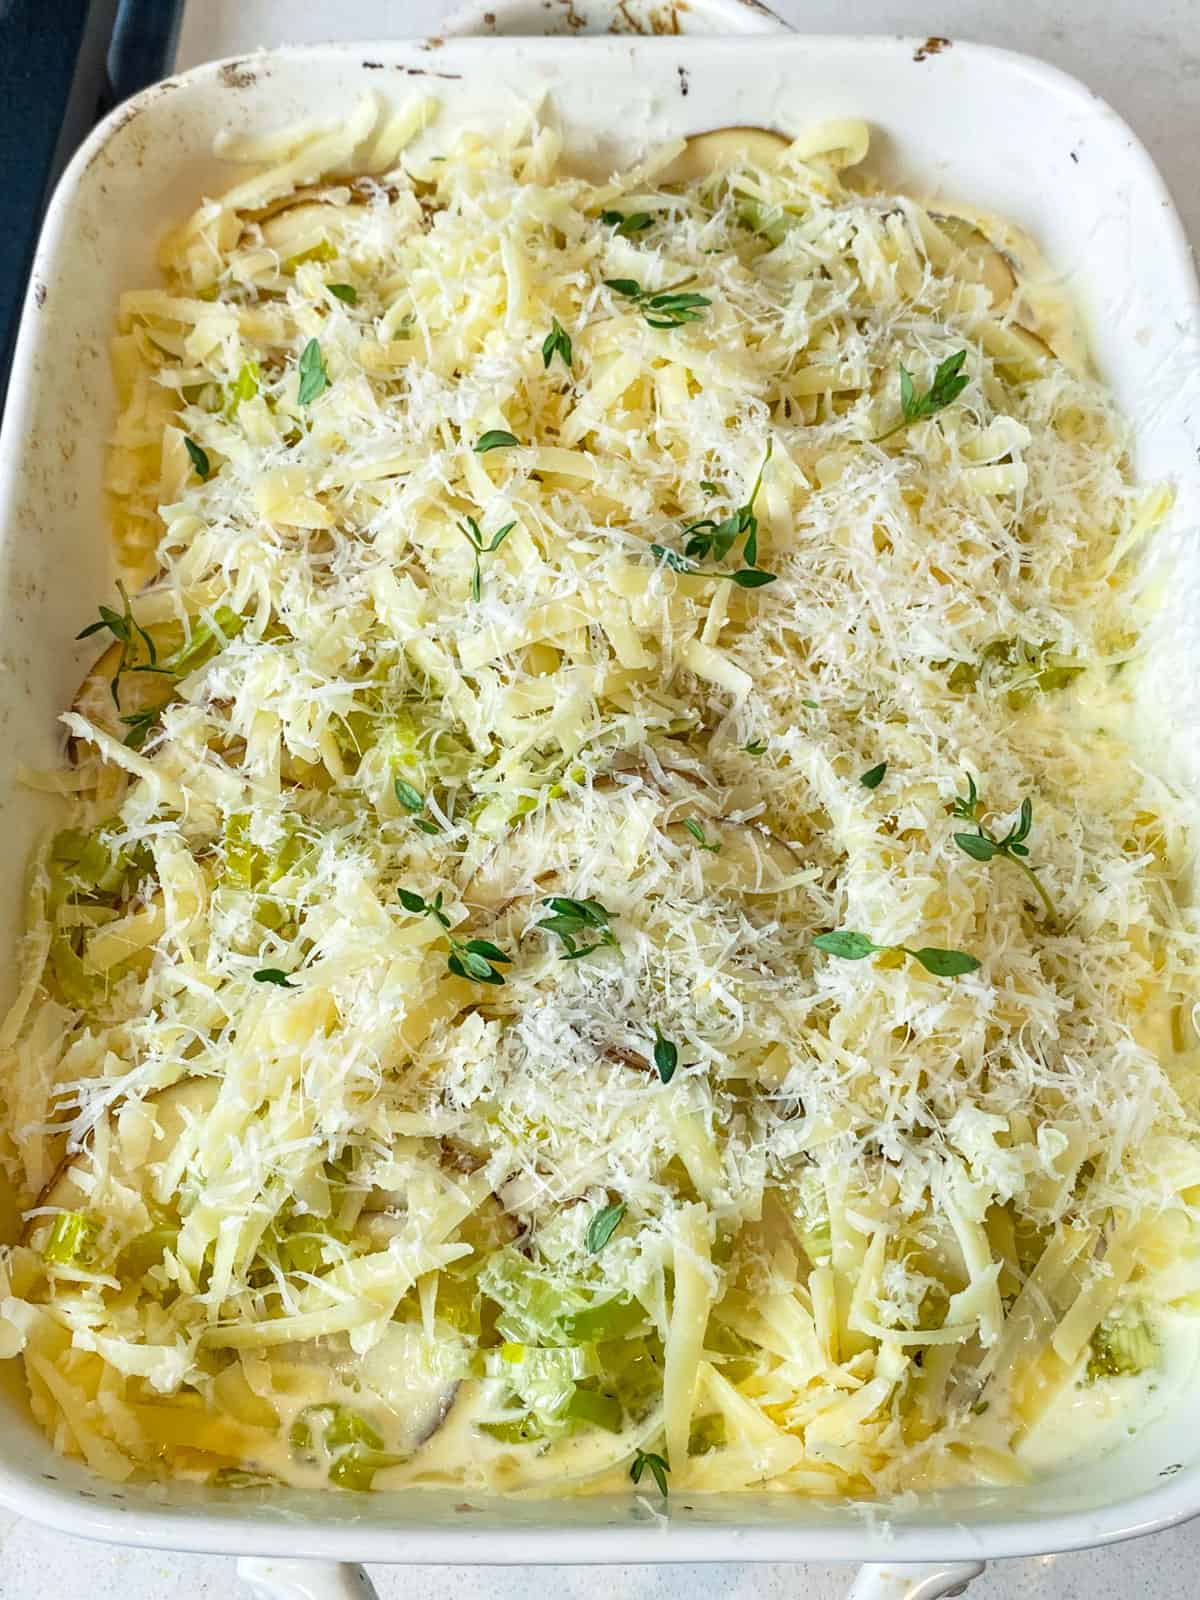 Top the potato leek gratin with shredded gouda cheese and grated Parmesan cheese.